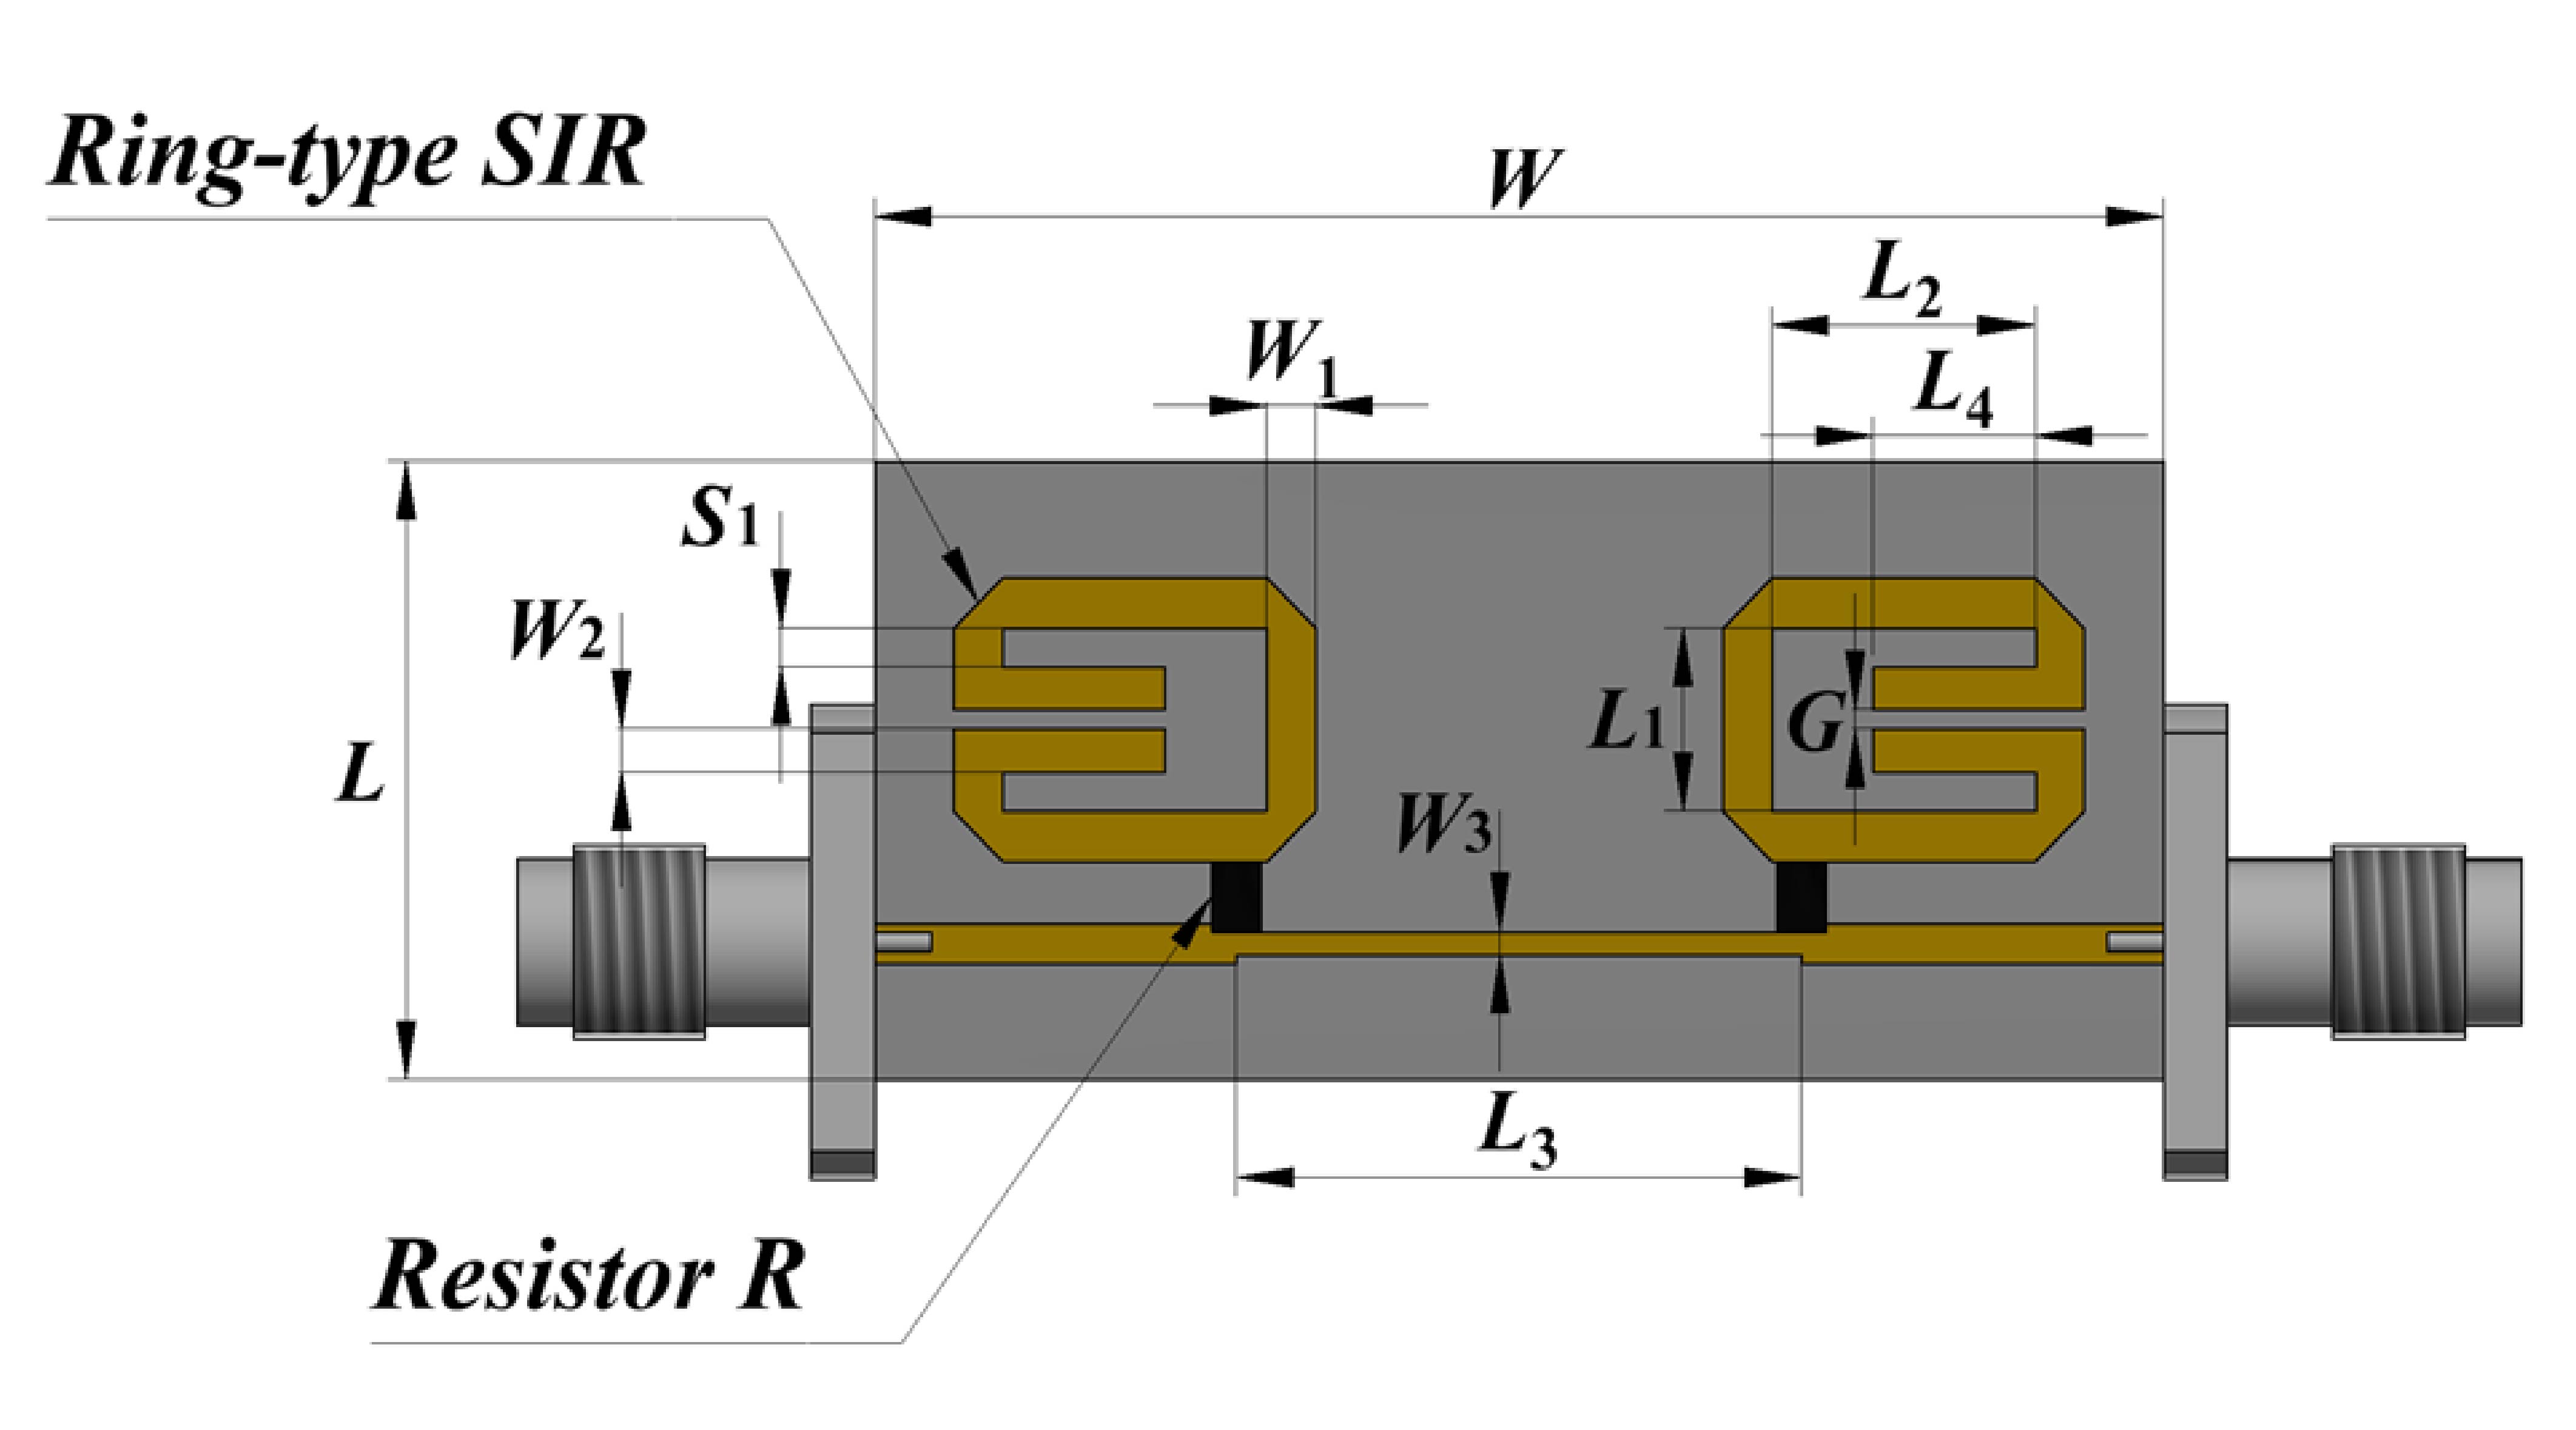 A Novel Microwave Equalizer Based on SIR Loading with Internal Coupled-lines